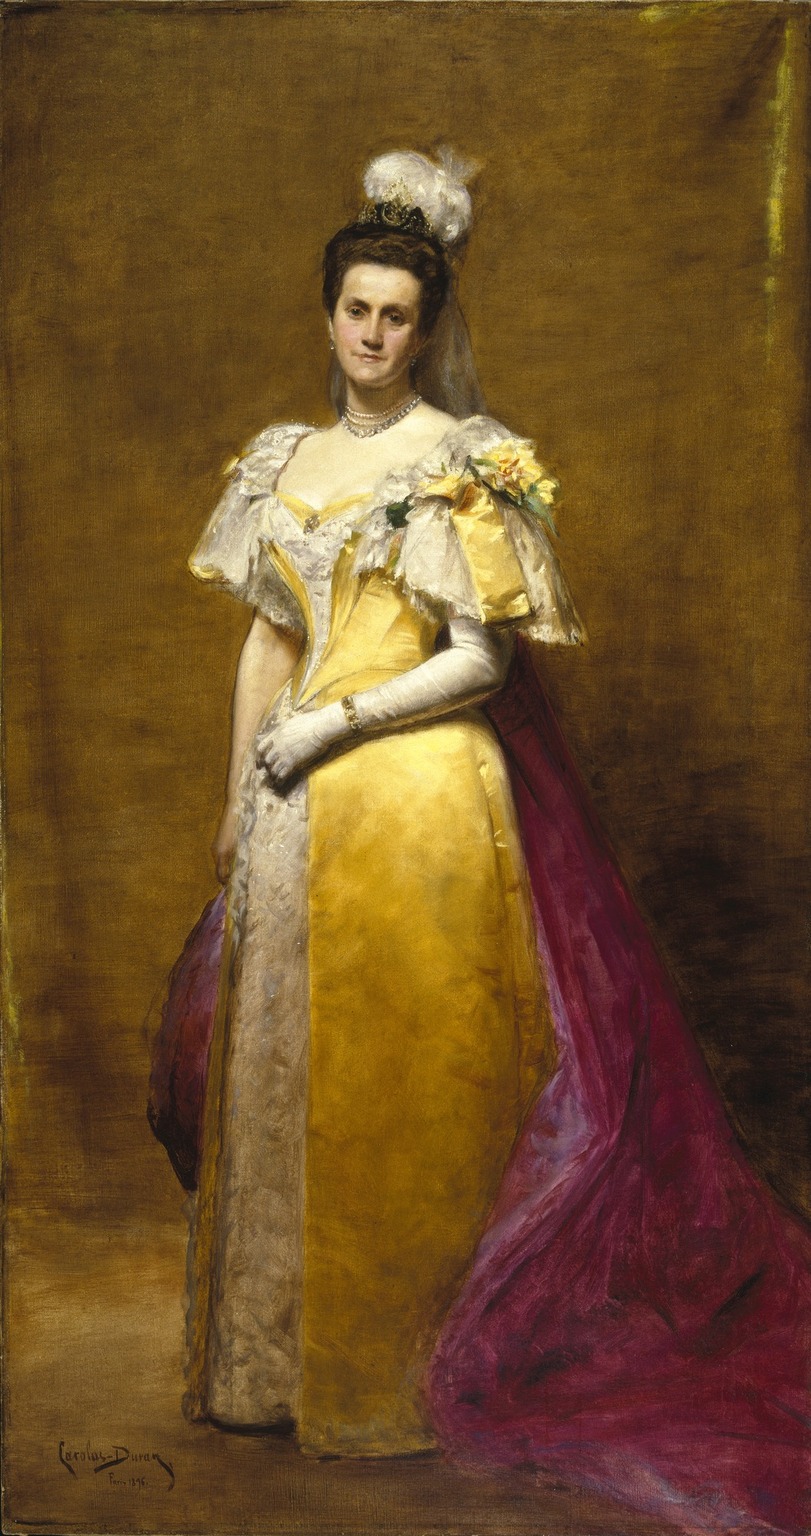 A painting of a woman in a yellow dress posing. 